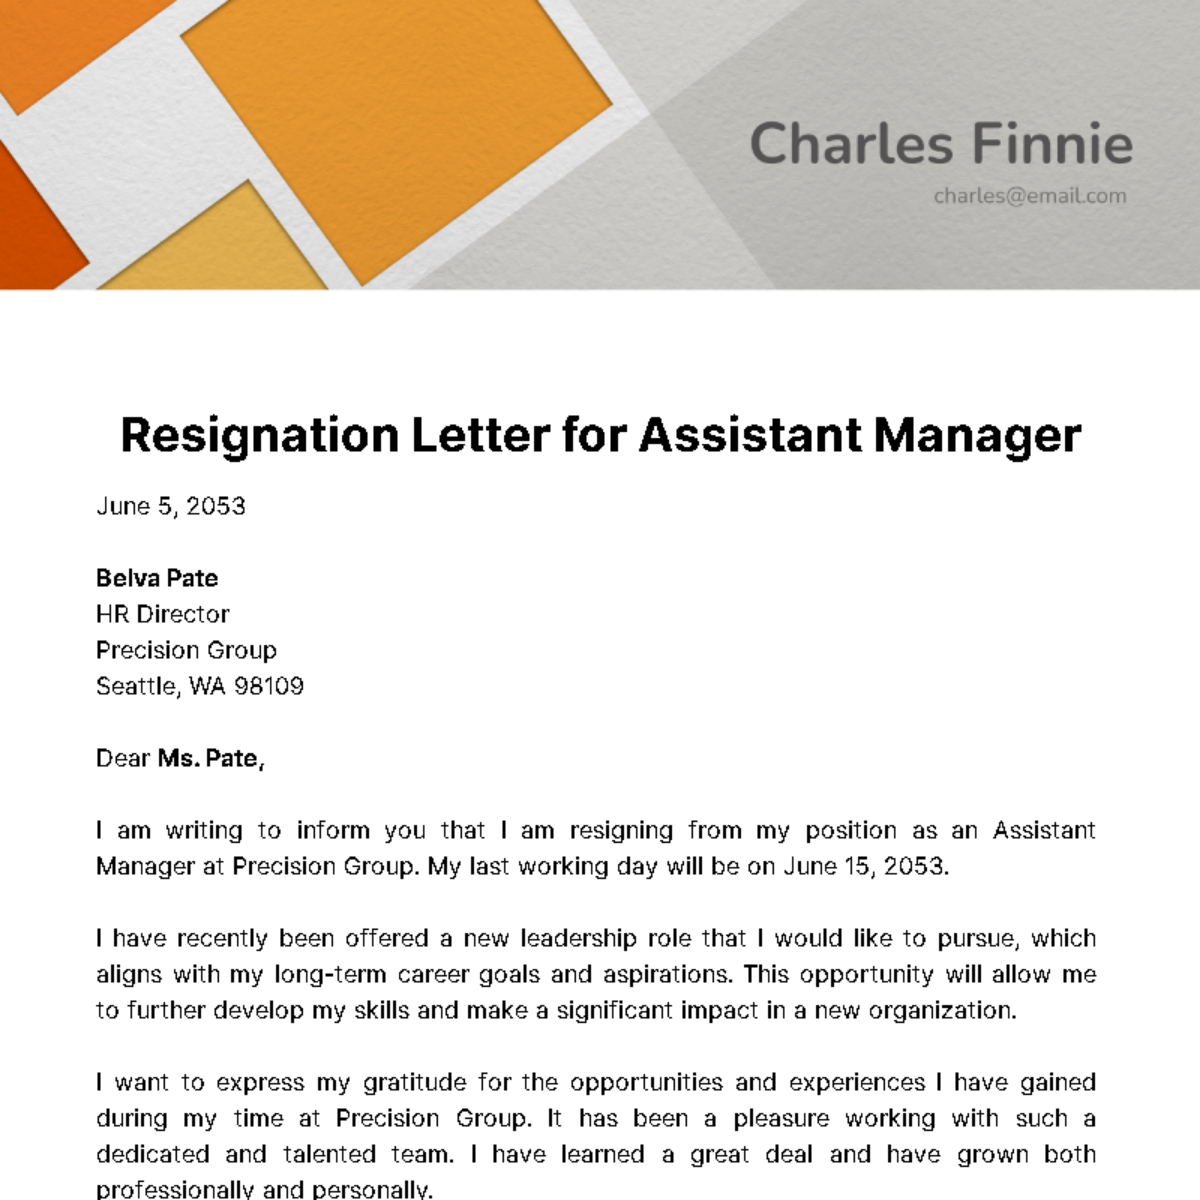 Resignation Letter for Assistant Manager Template